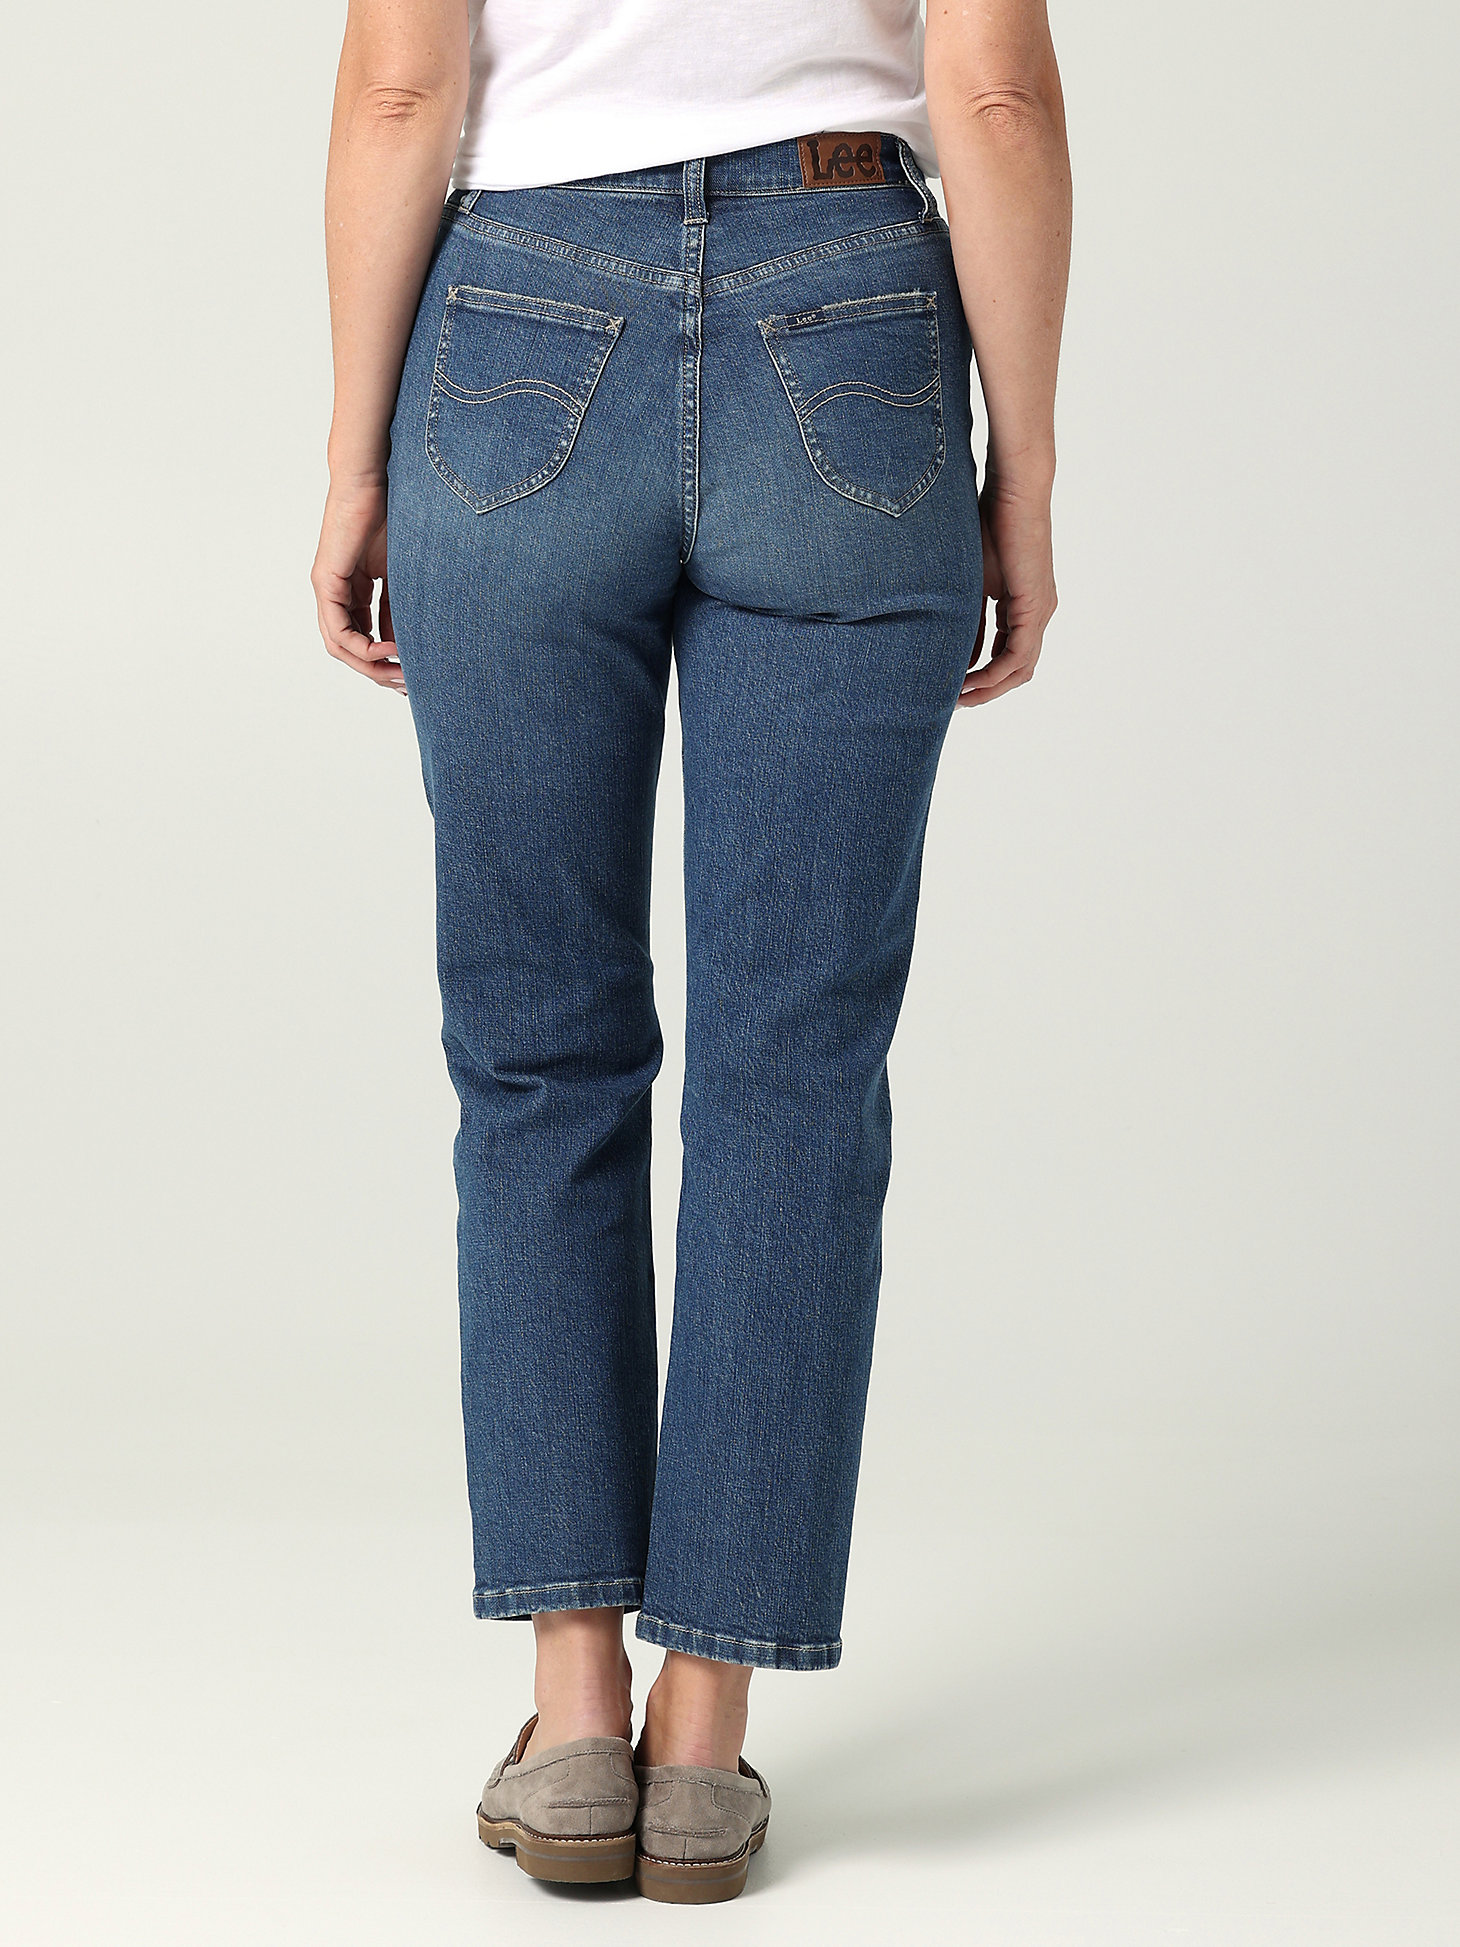 Women's Legendary High Rise Vintage Straight Jean in Everyday alternative view 1